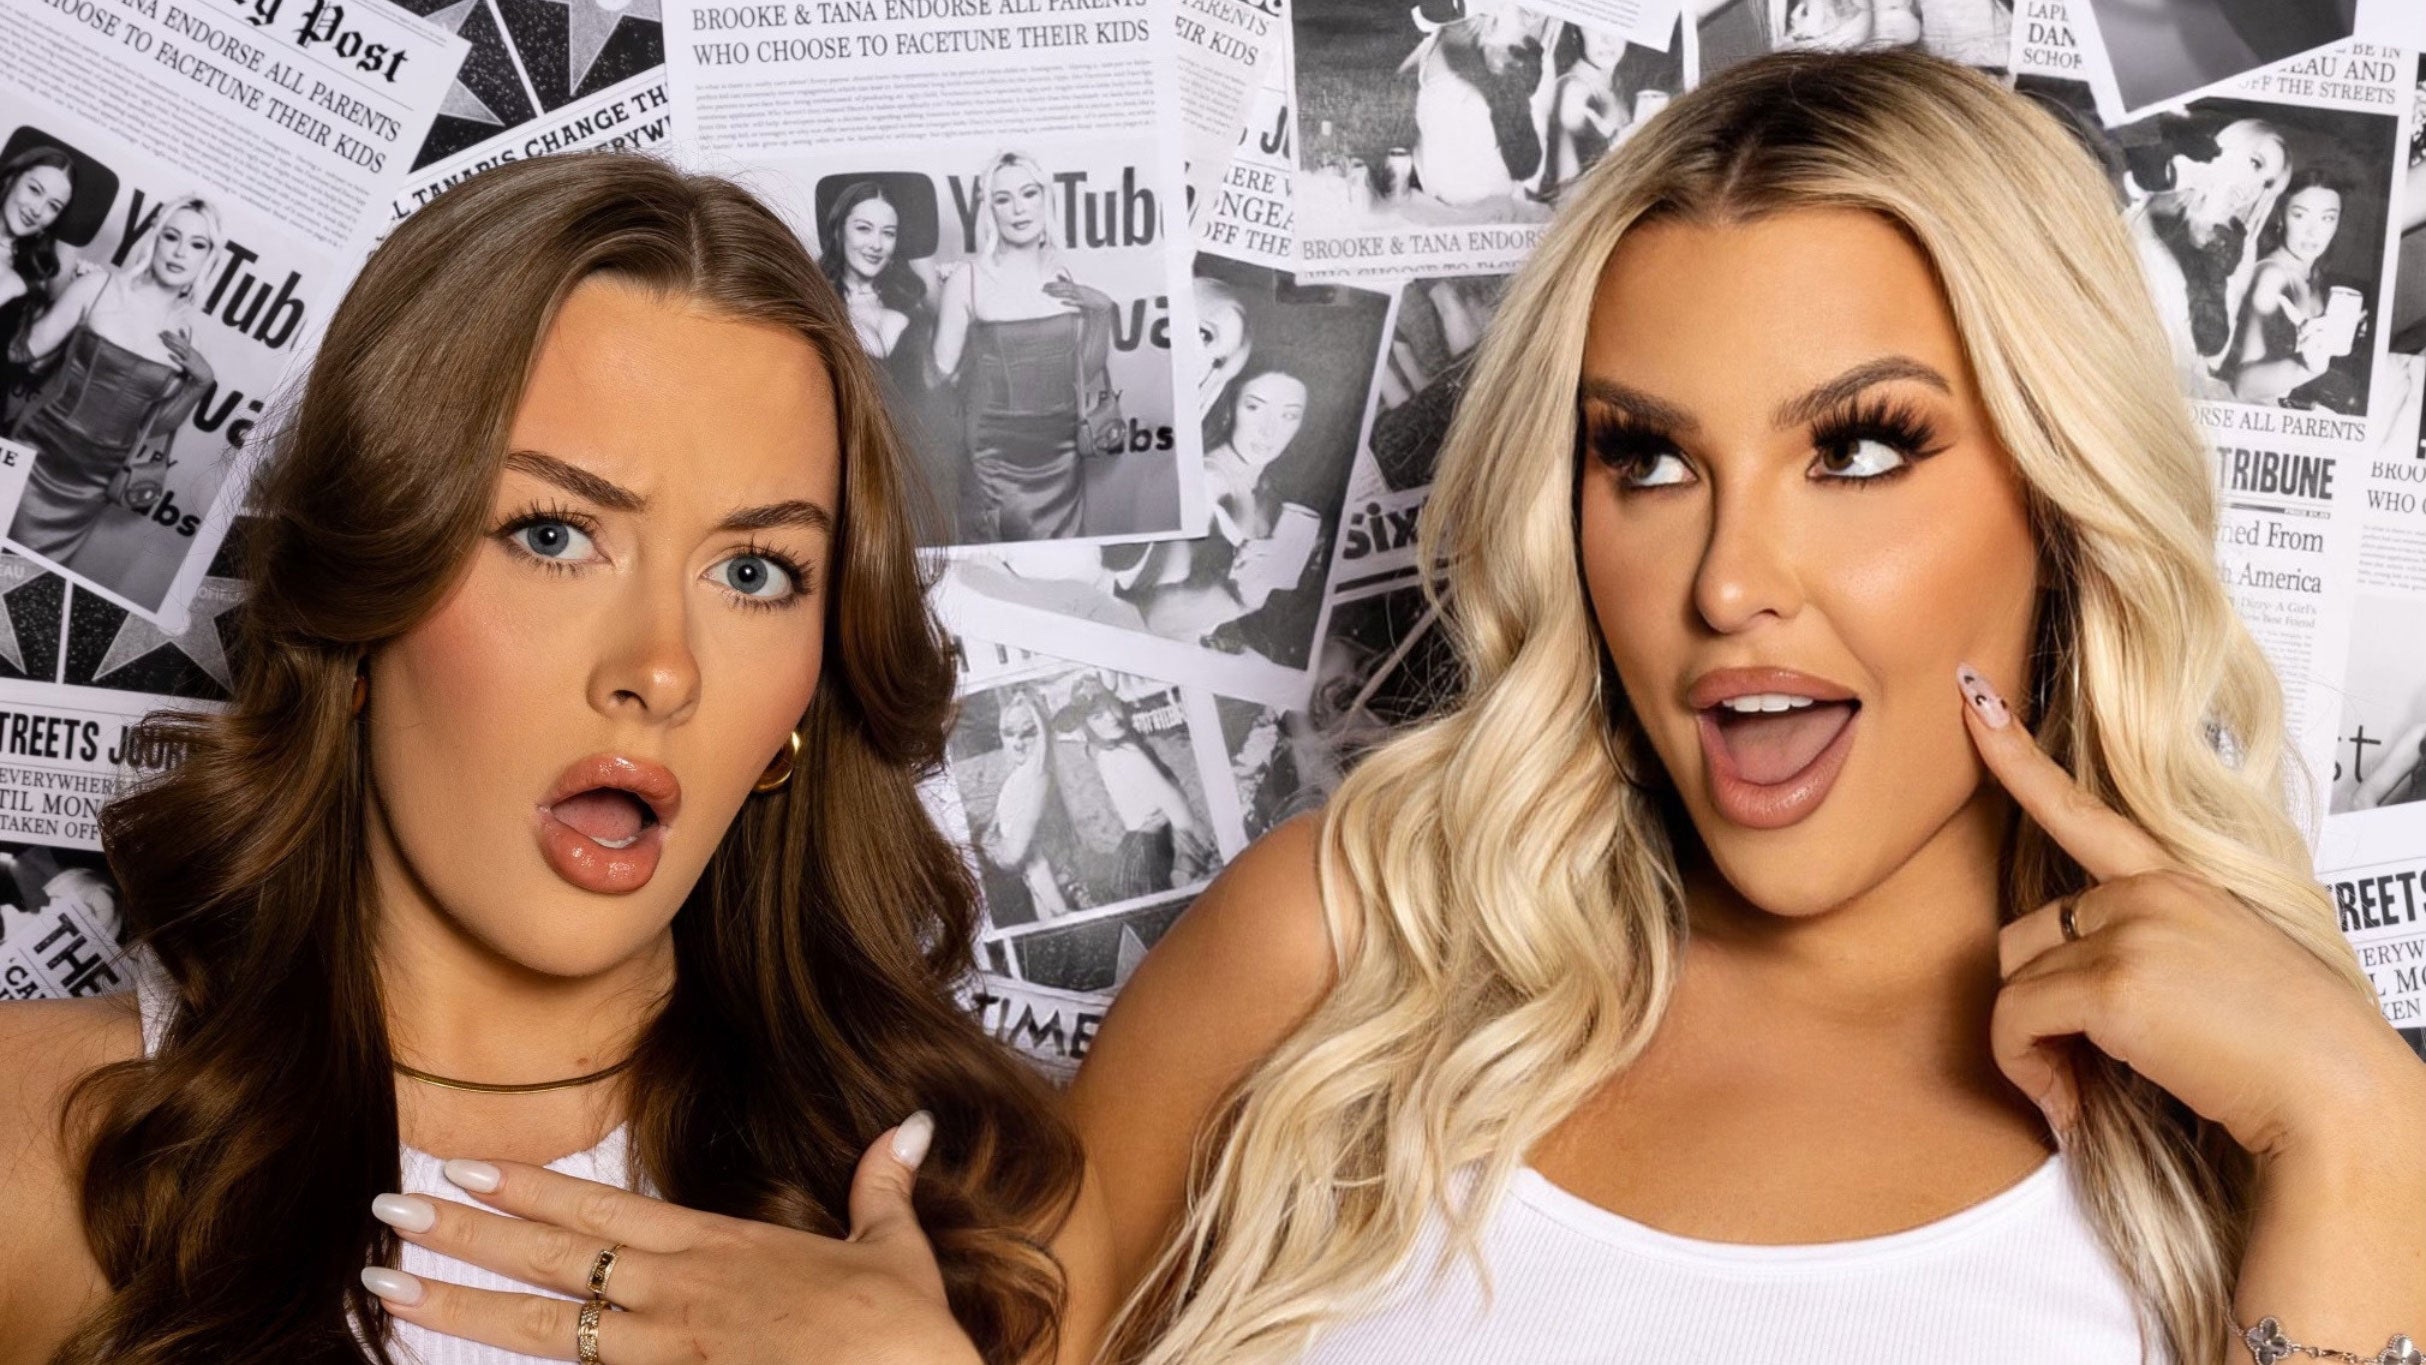 The Cancelled Podcast Tour With Tana Mongeau & Brooke Schofield presales in San Francisco